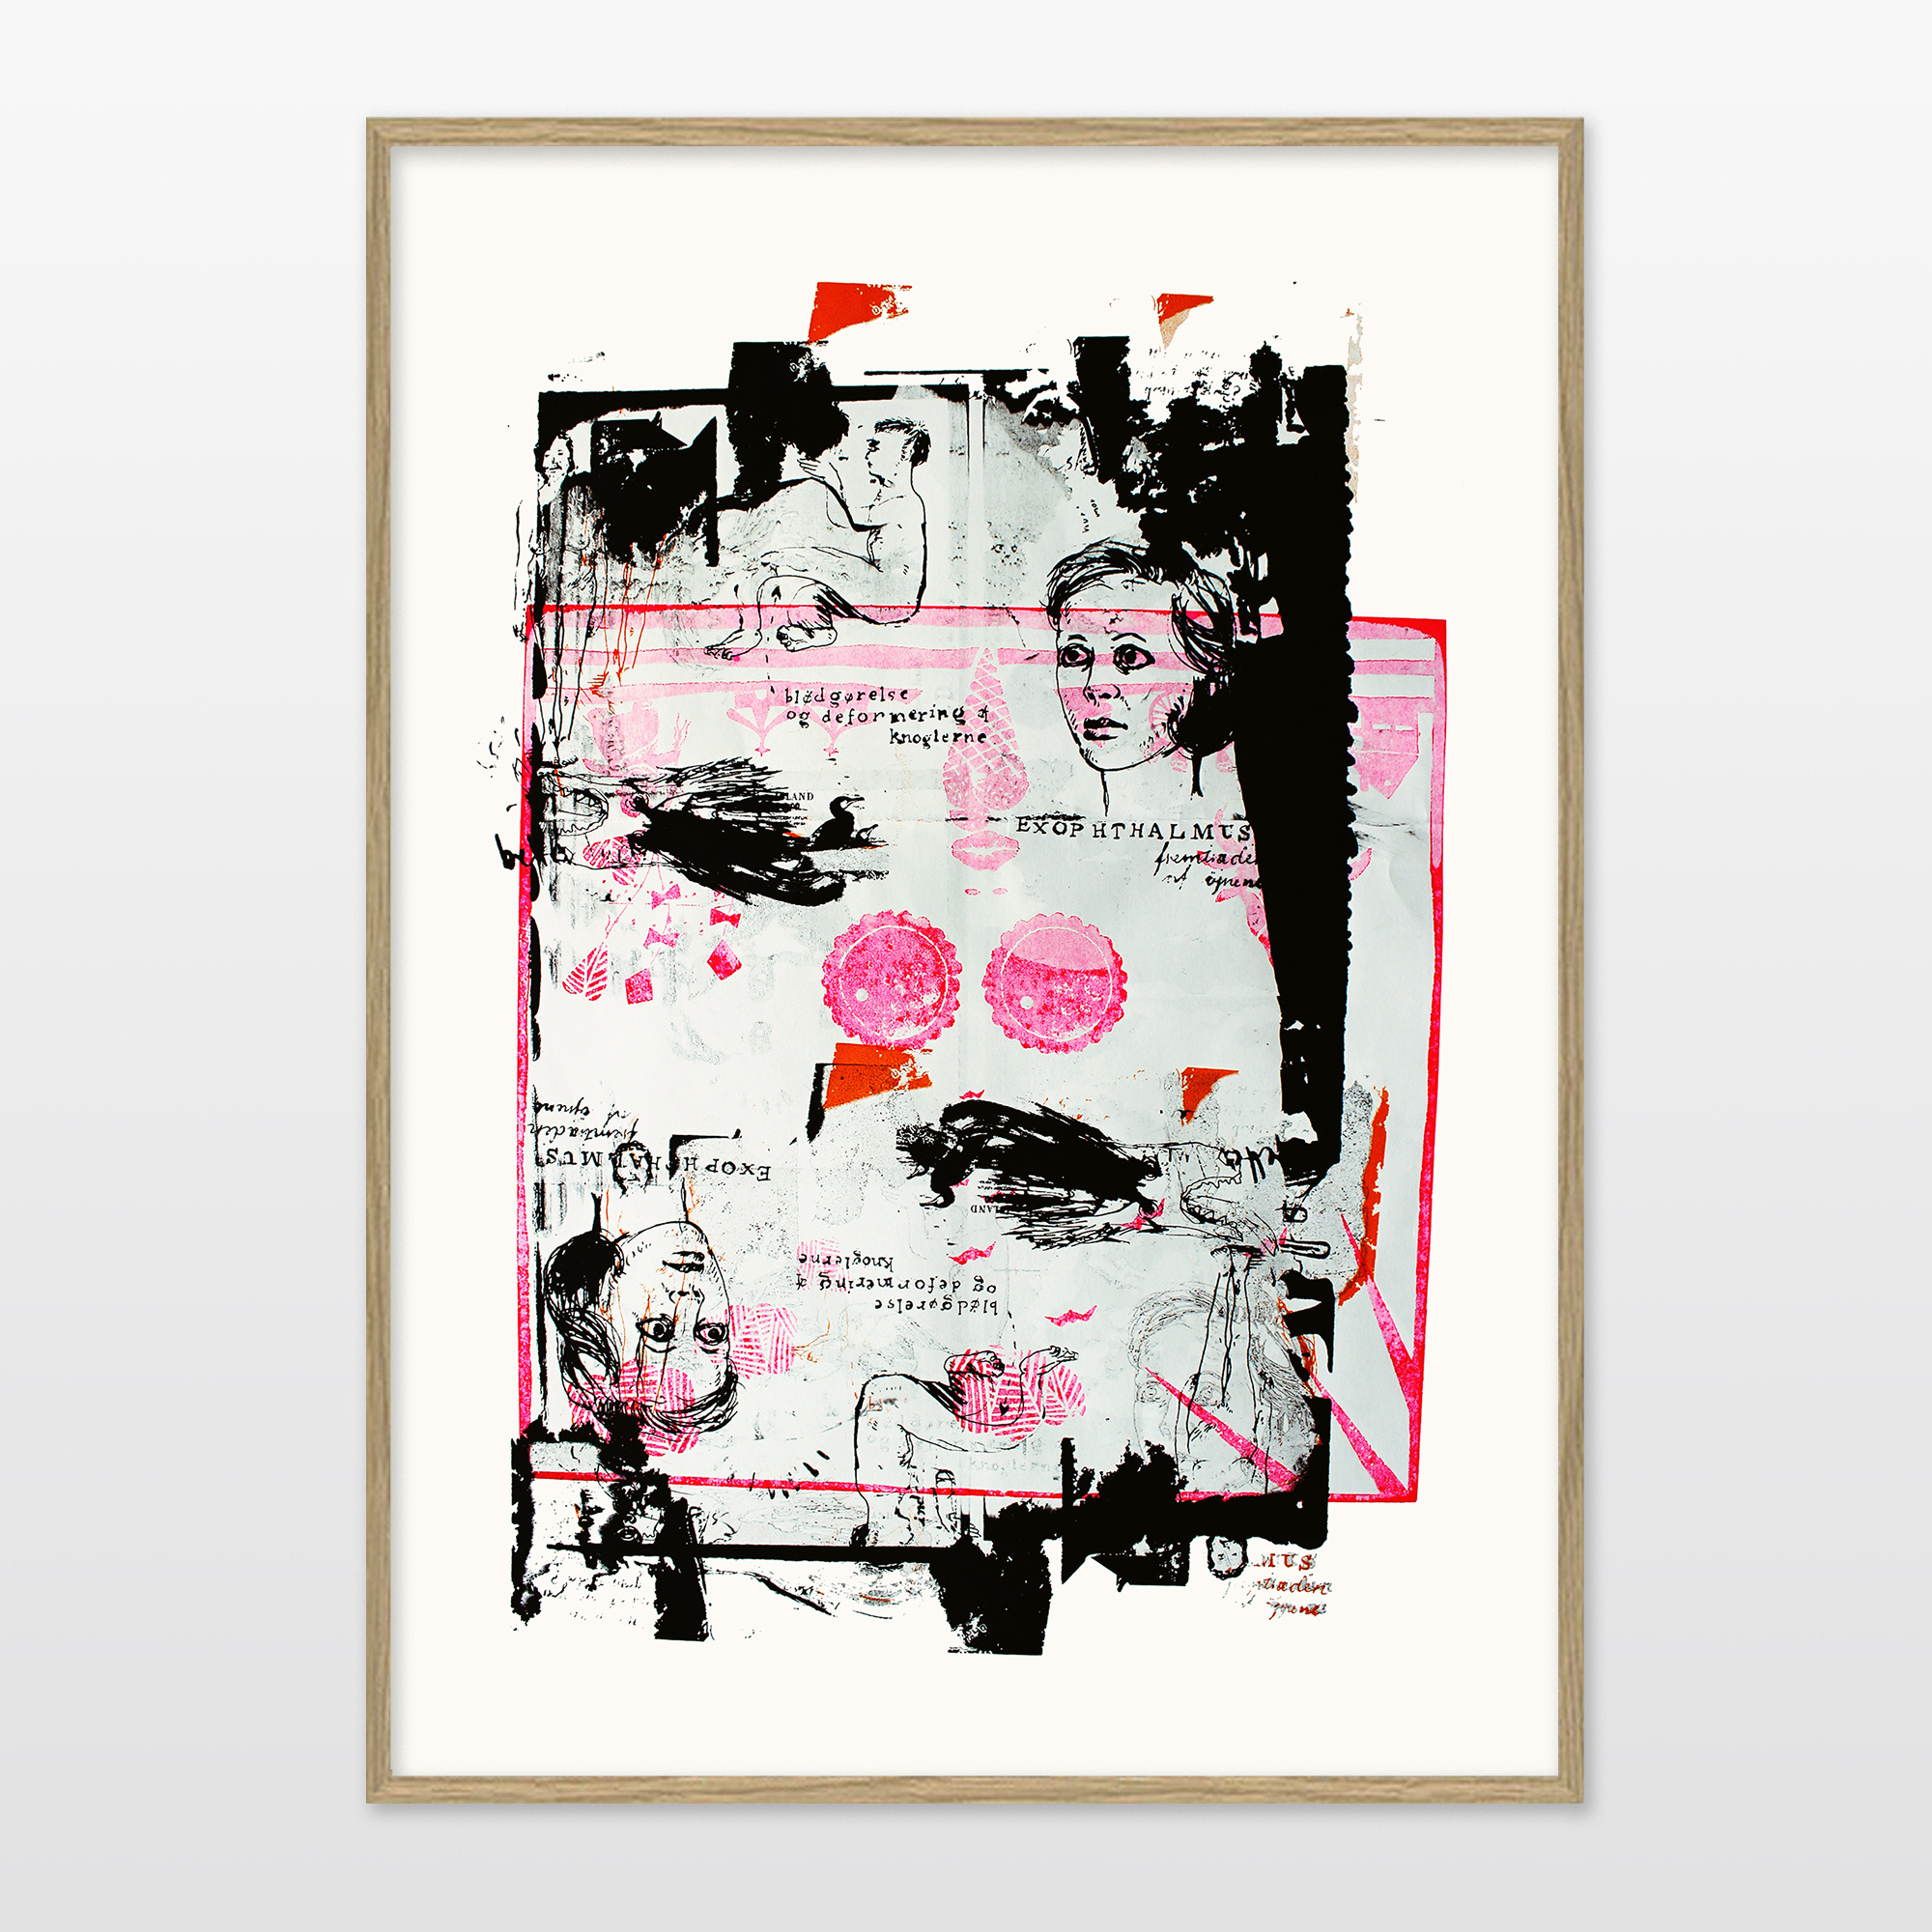 posters-prints, giclee-print, abstract, figurative, portraiture, bodies, people, pets, black, pink, white, ink, paper, beautiful, contemporary-art, copenhagen, danish, decorative, design, dogs, faces, interior, interior-design, modern, modern-art, nordic, women, Buy original high quality art. Paintings, drawings, limited edition prints & posters by talented artists.